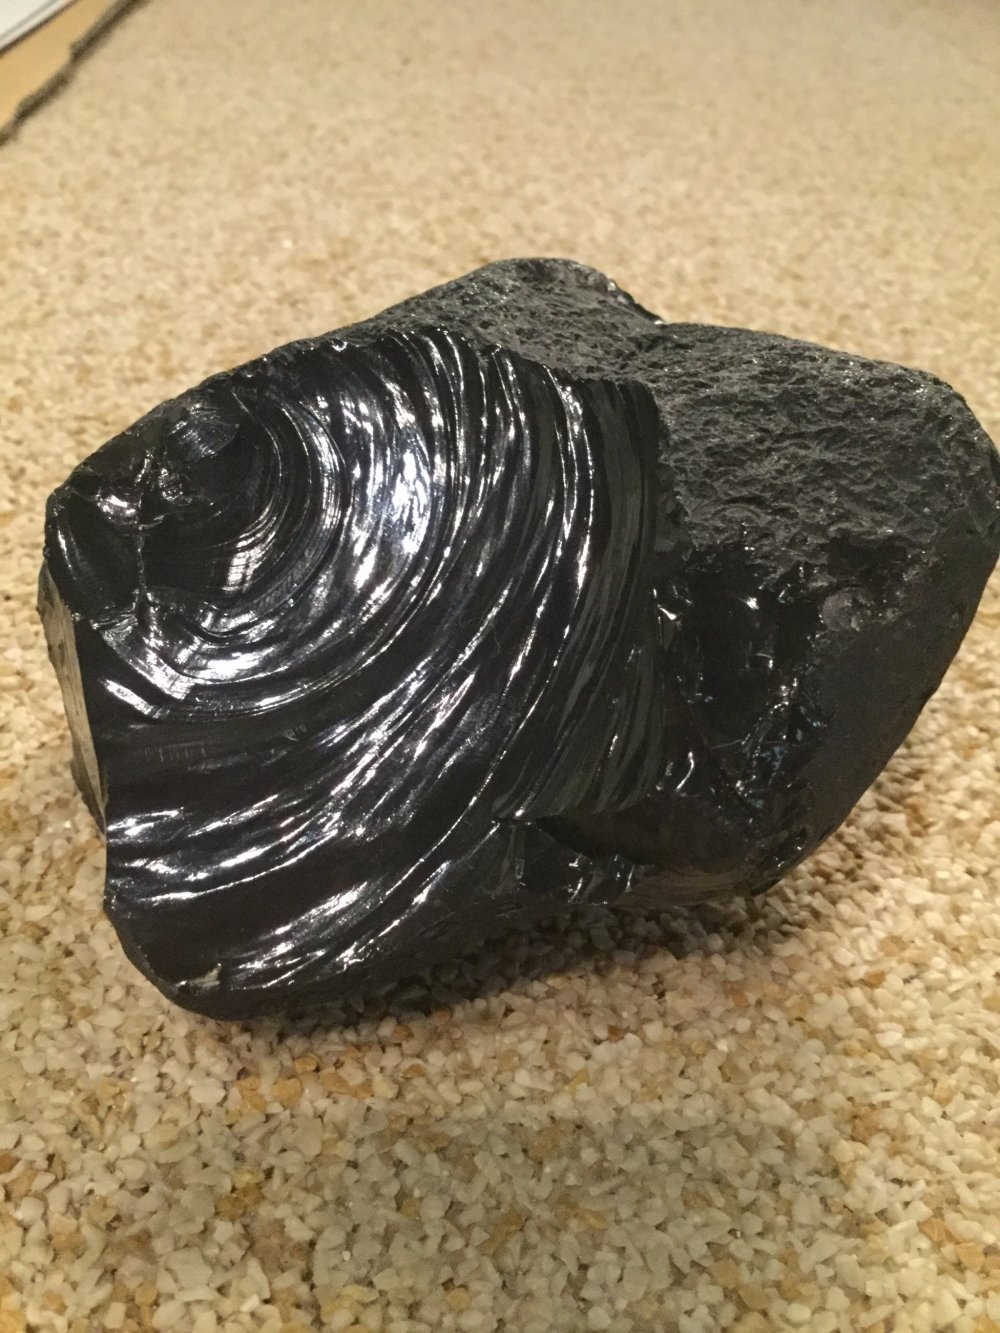 Obsidian. The edge is sharp enough to cut clean through a newspaper. Some of the earliest tools were made of obsidian.